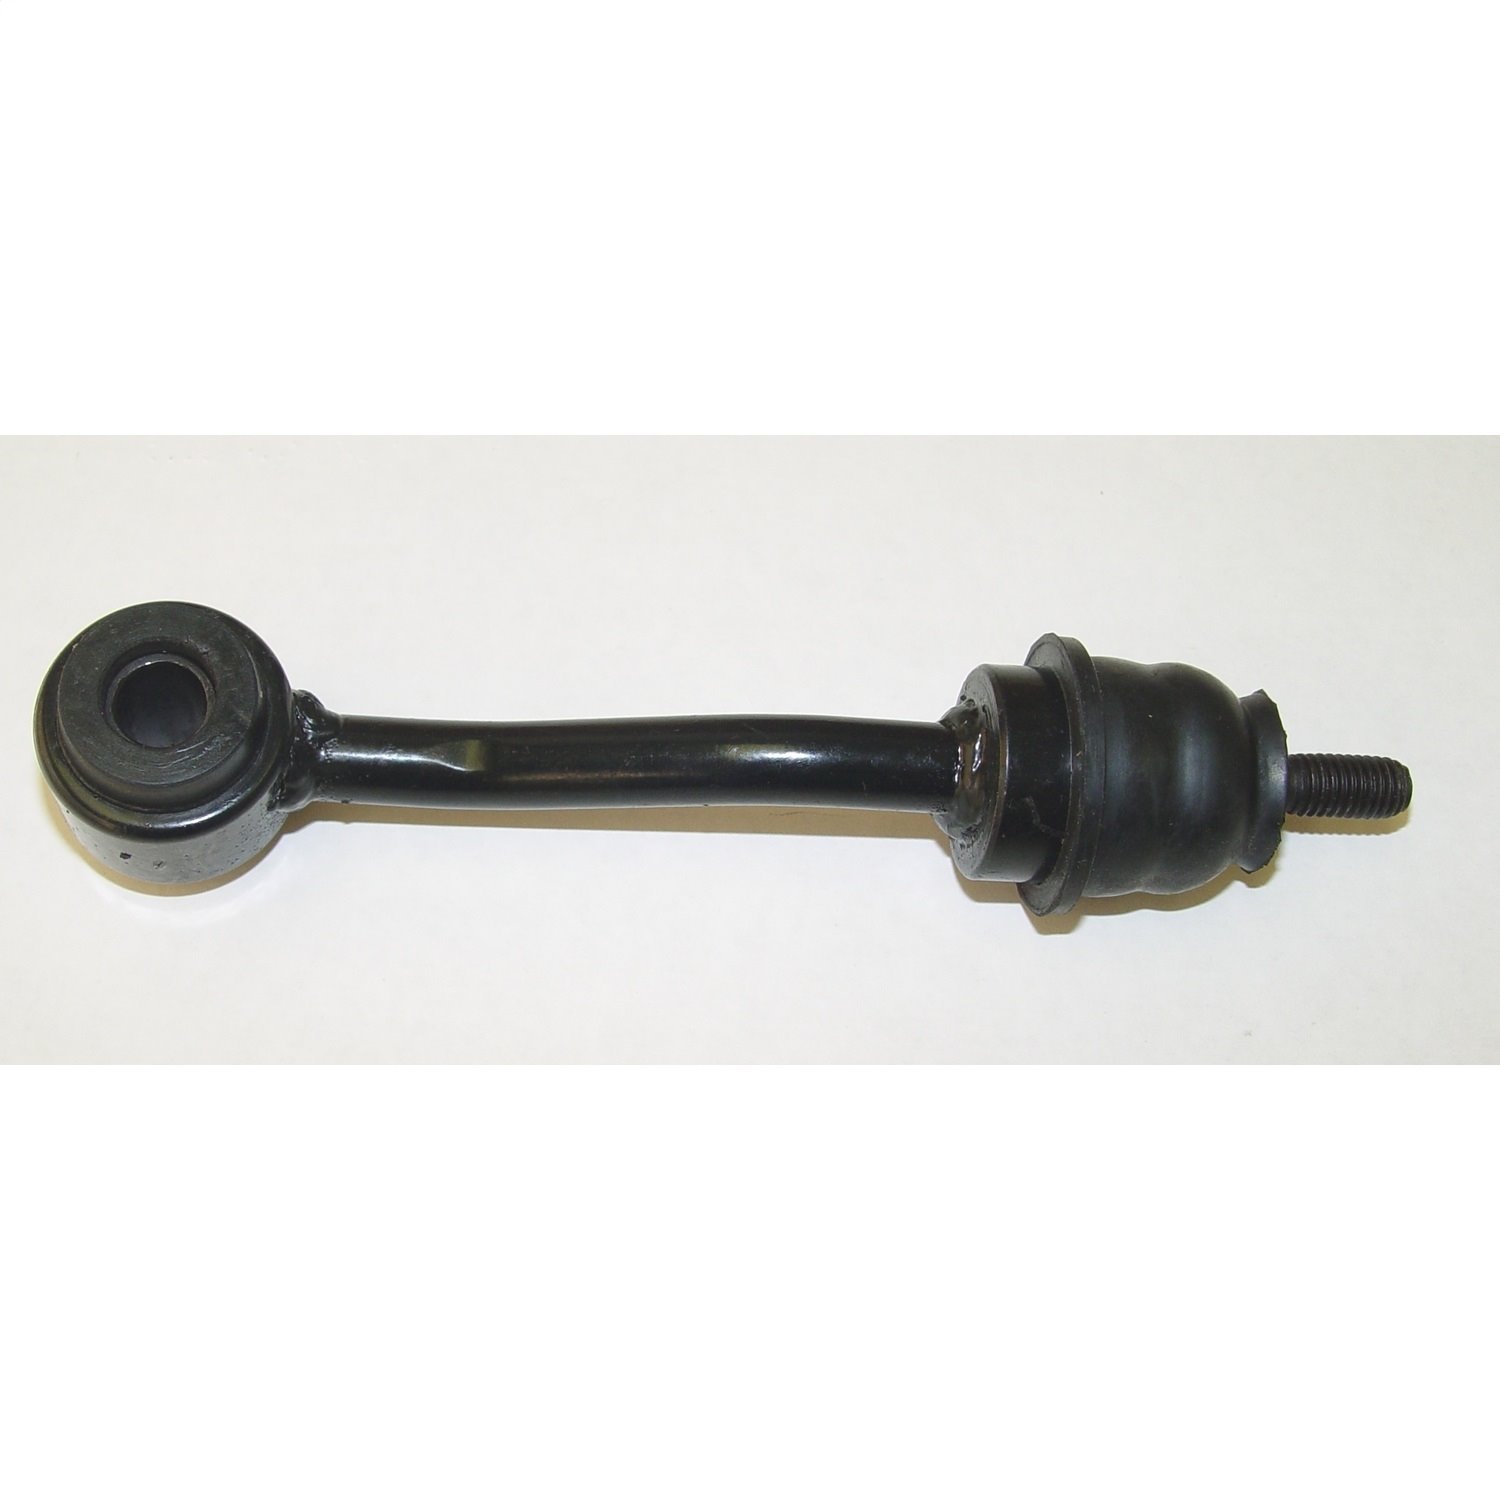 Replacement front sway bar end link from Omix-ADA, Fits 93-98 Jeep Grand Cherokee ZJbushing is included.